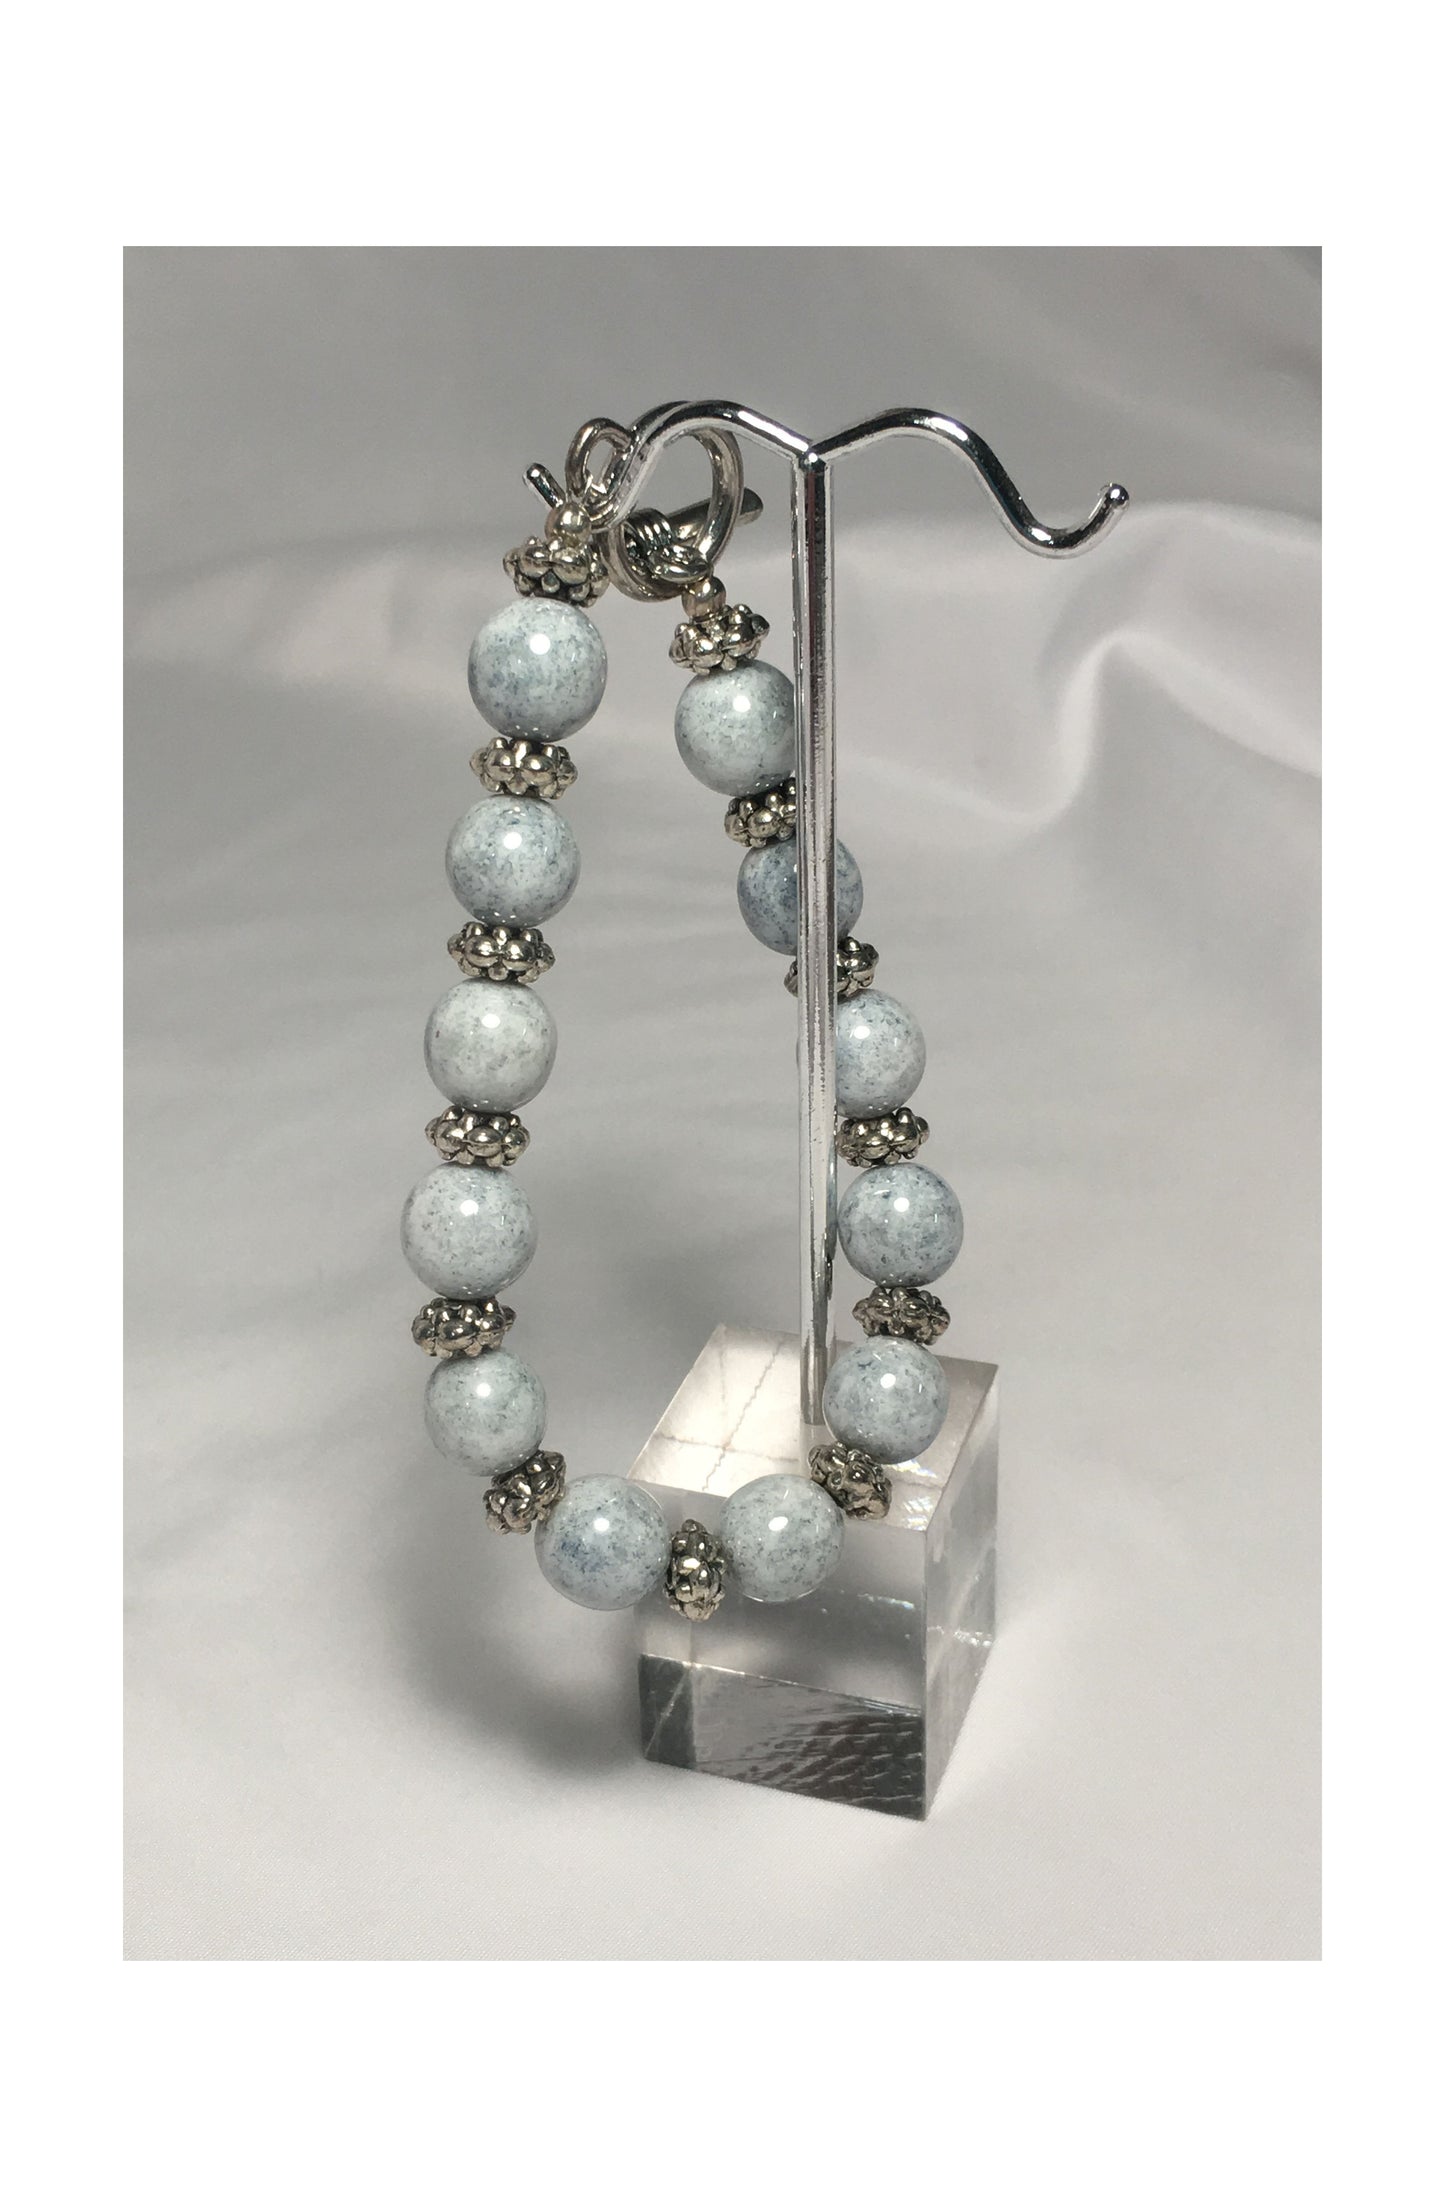 Blue Speckled White Glass and Silver Bead Bracelet